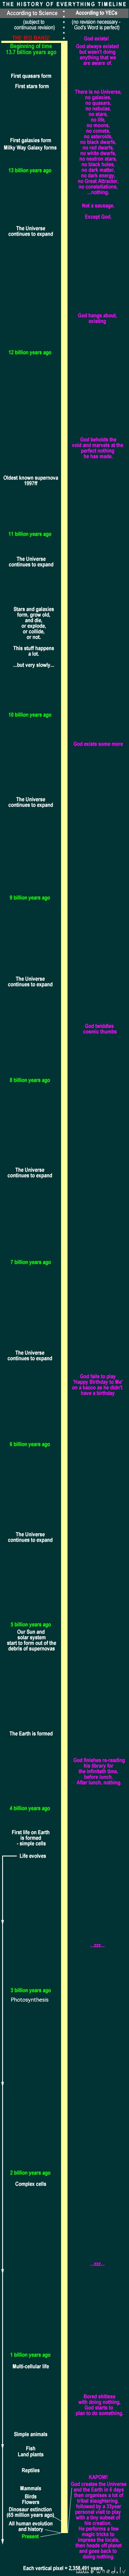 The history of everything timeline